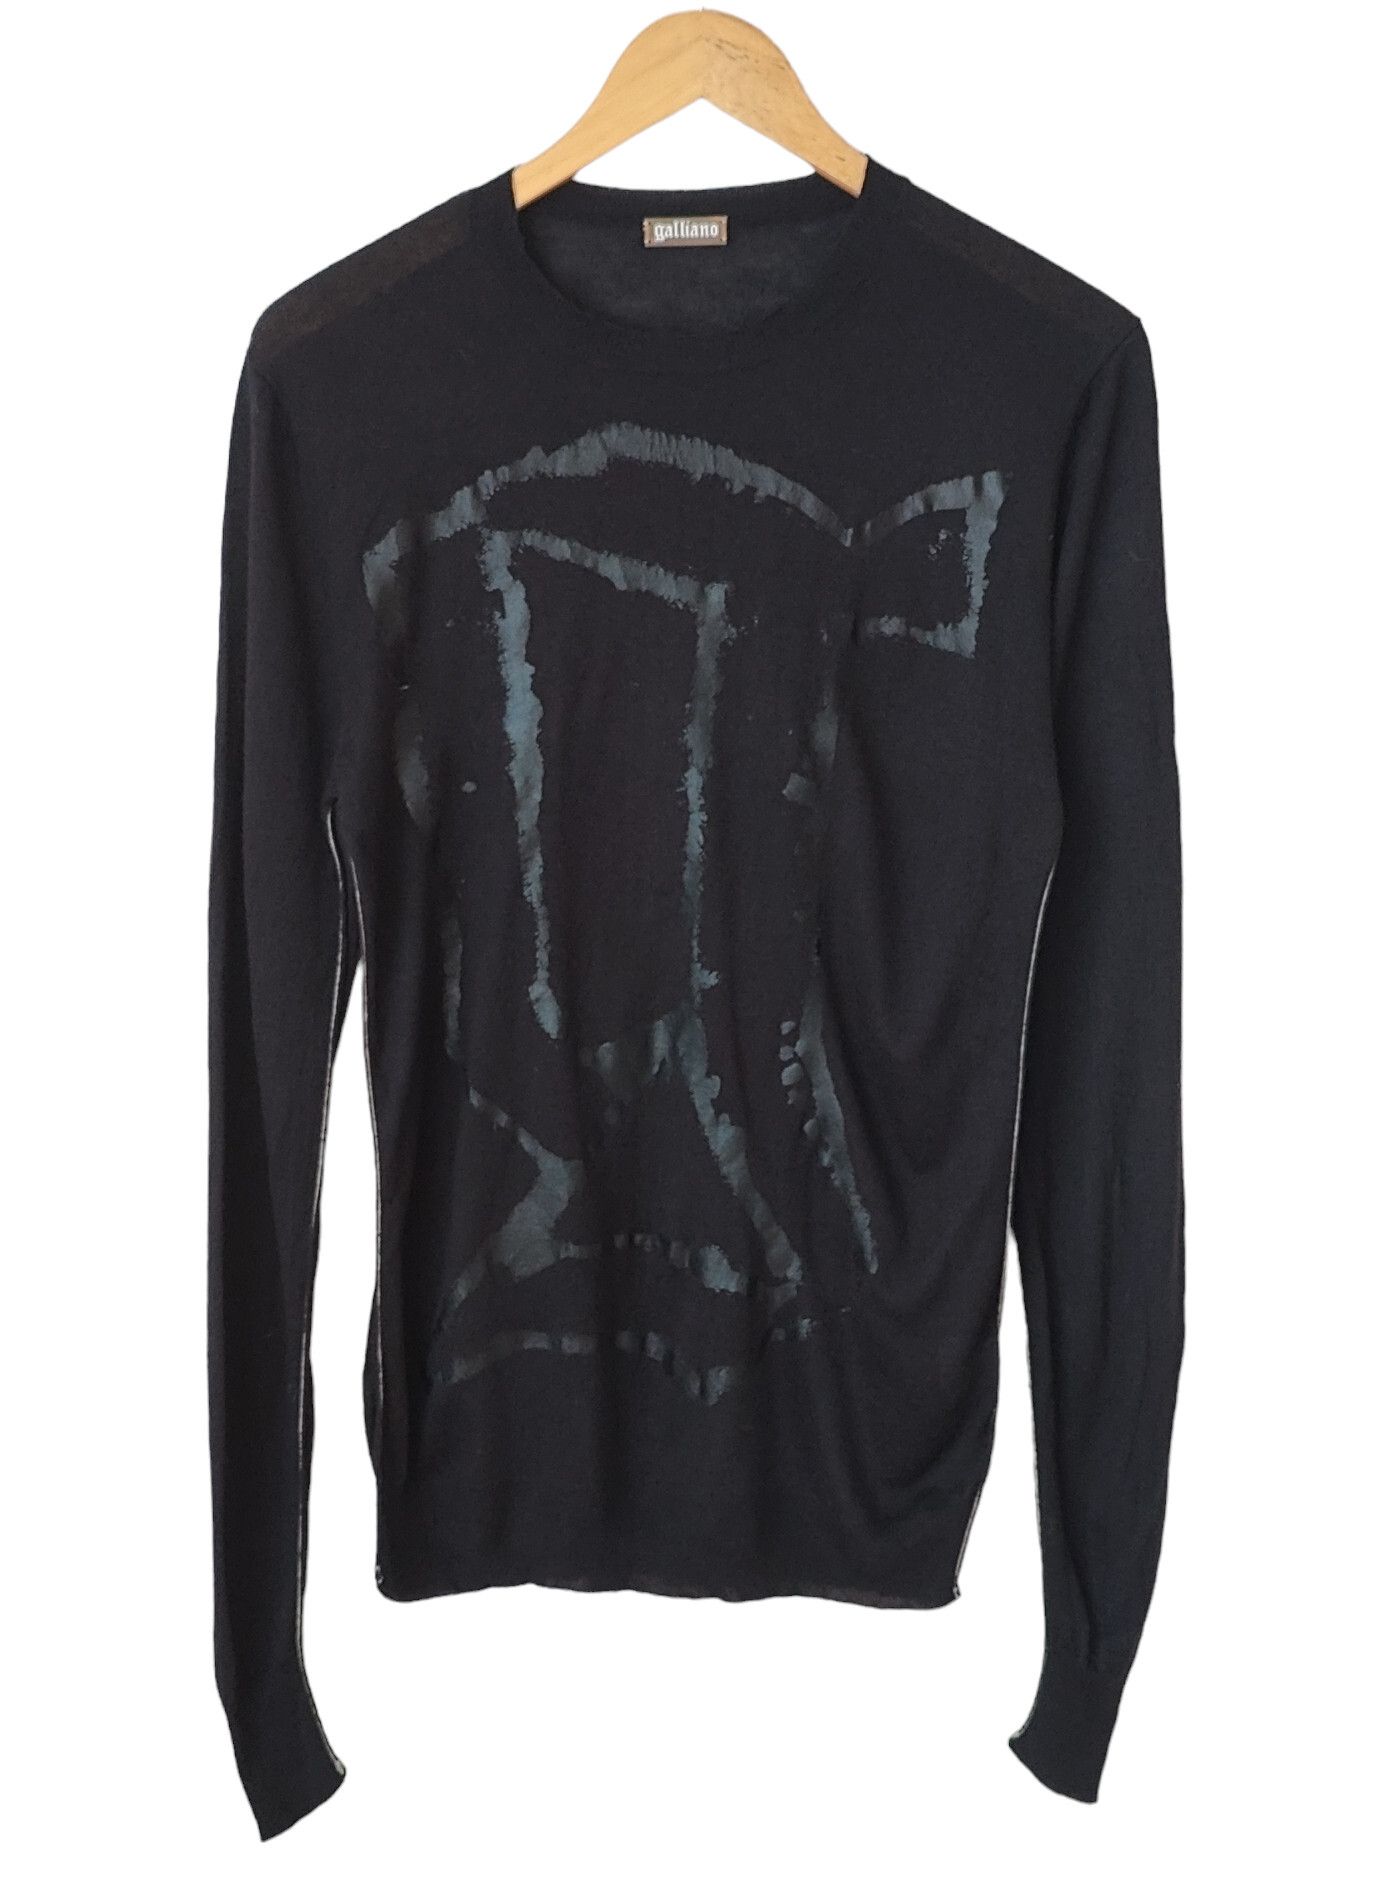 Archival Clothing John Galliano Archival 2011 Black Wool Knitted Sweater Size US S / EU 44-46 / 1 - 1 Preview